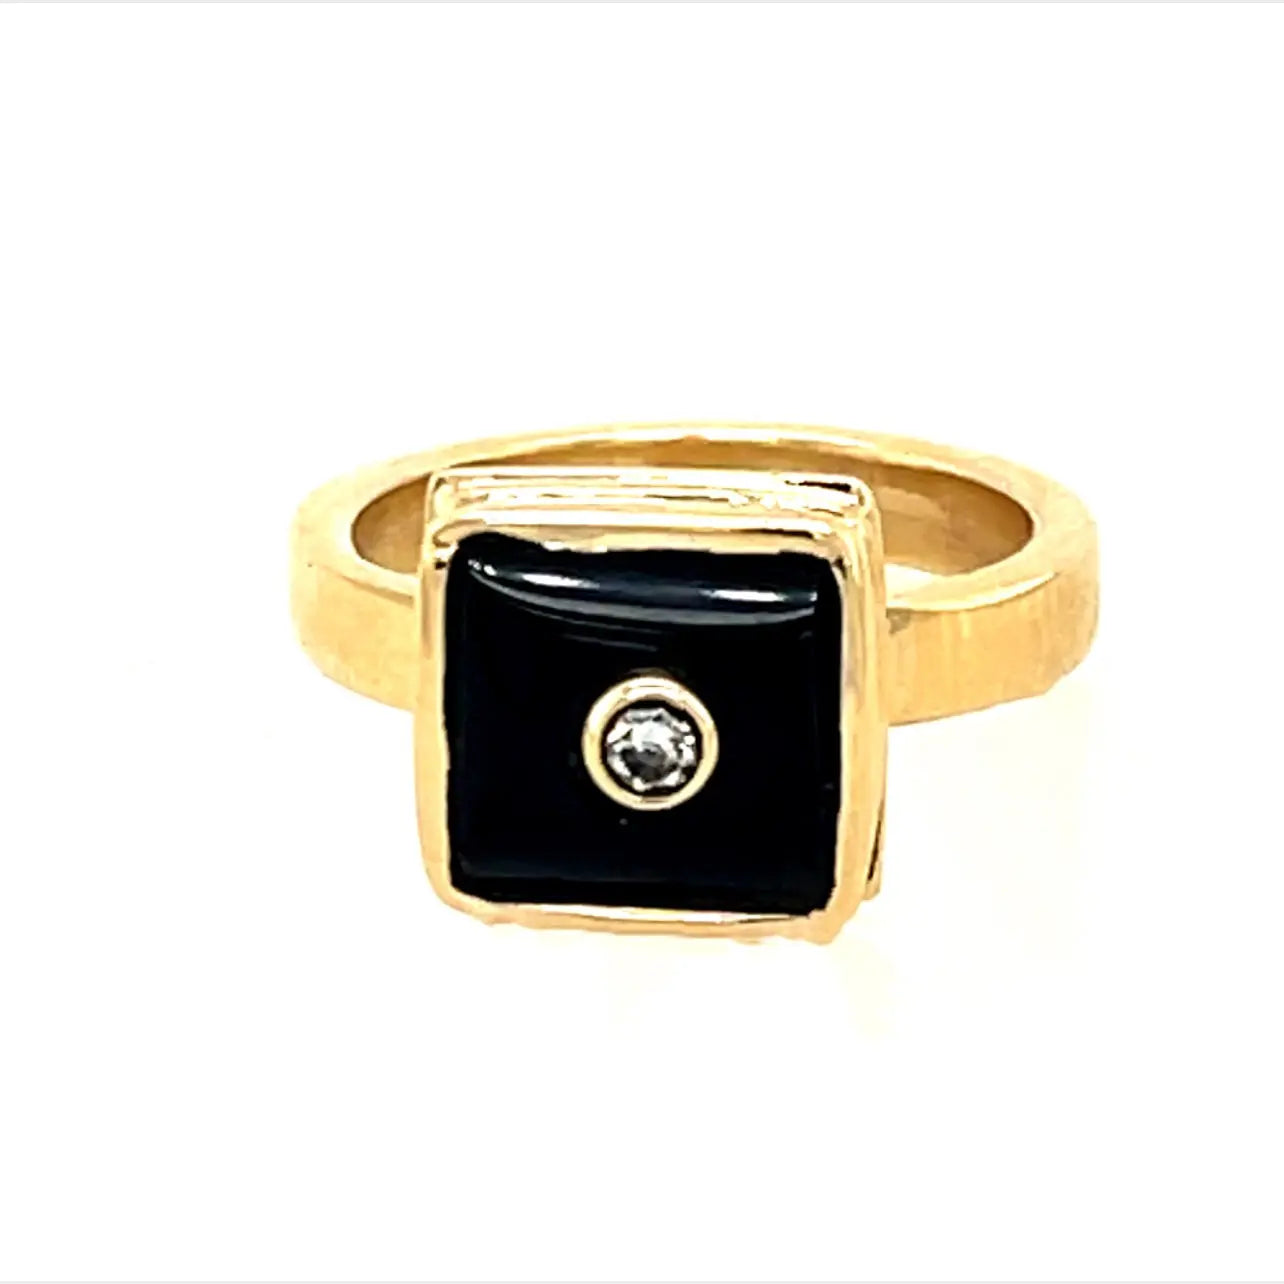 A great ring on its own or stacked.   14k yellow gold with onyx and diamond ring  Size: 4